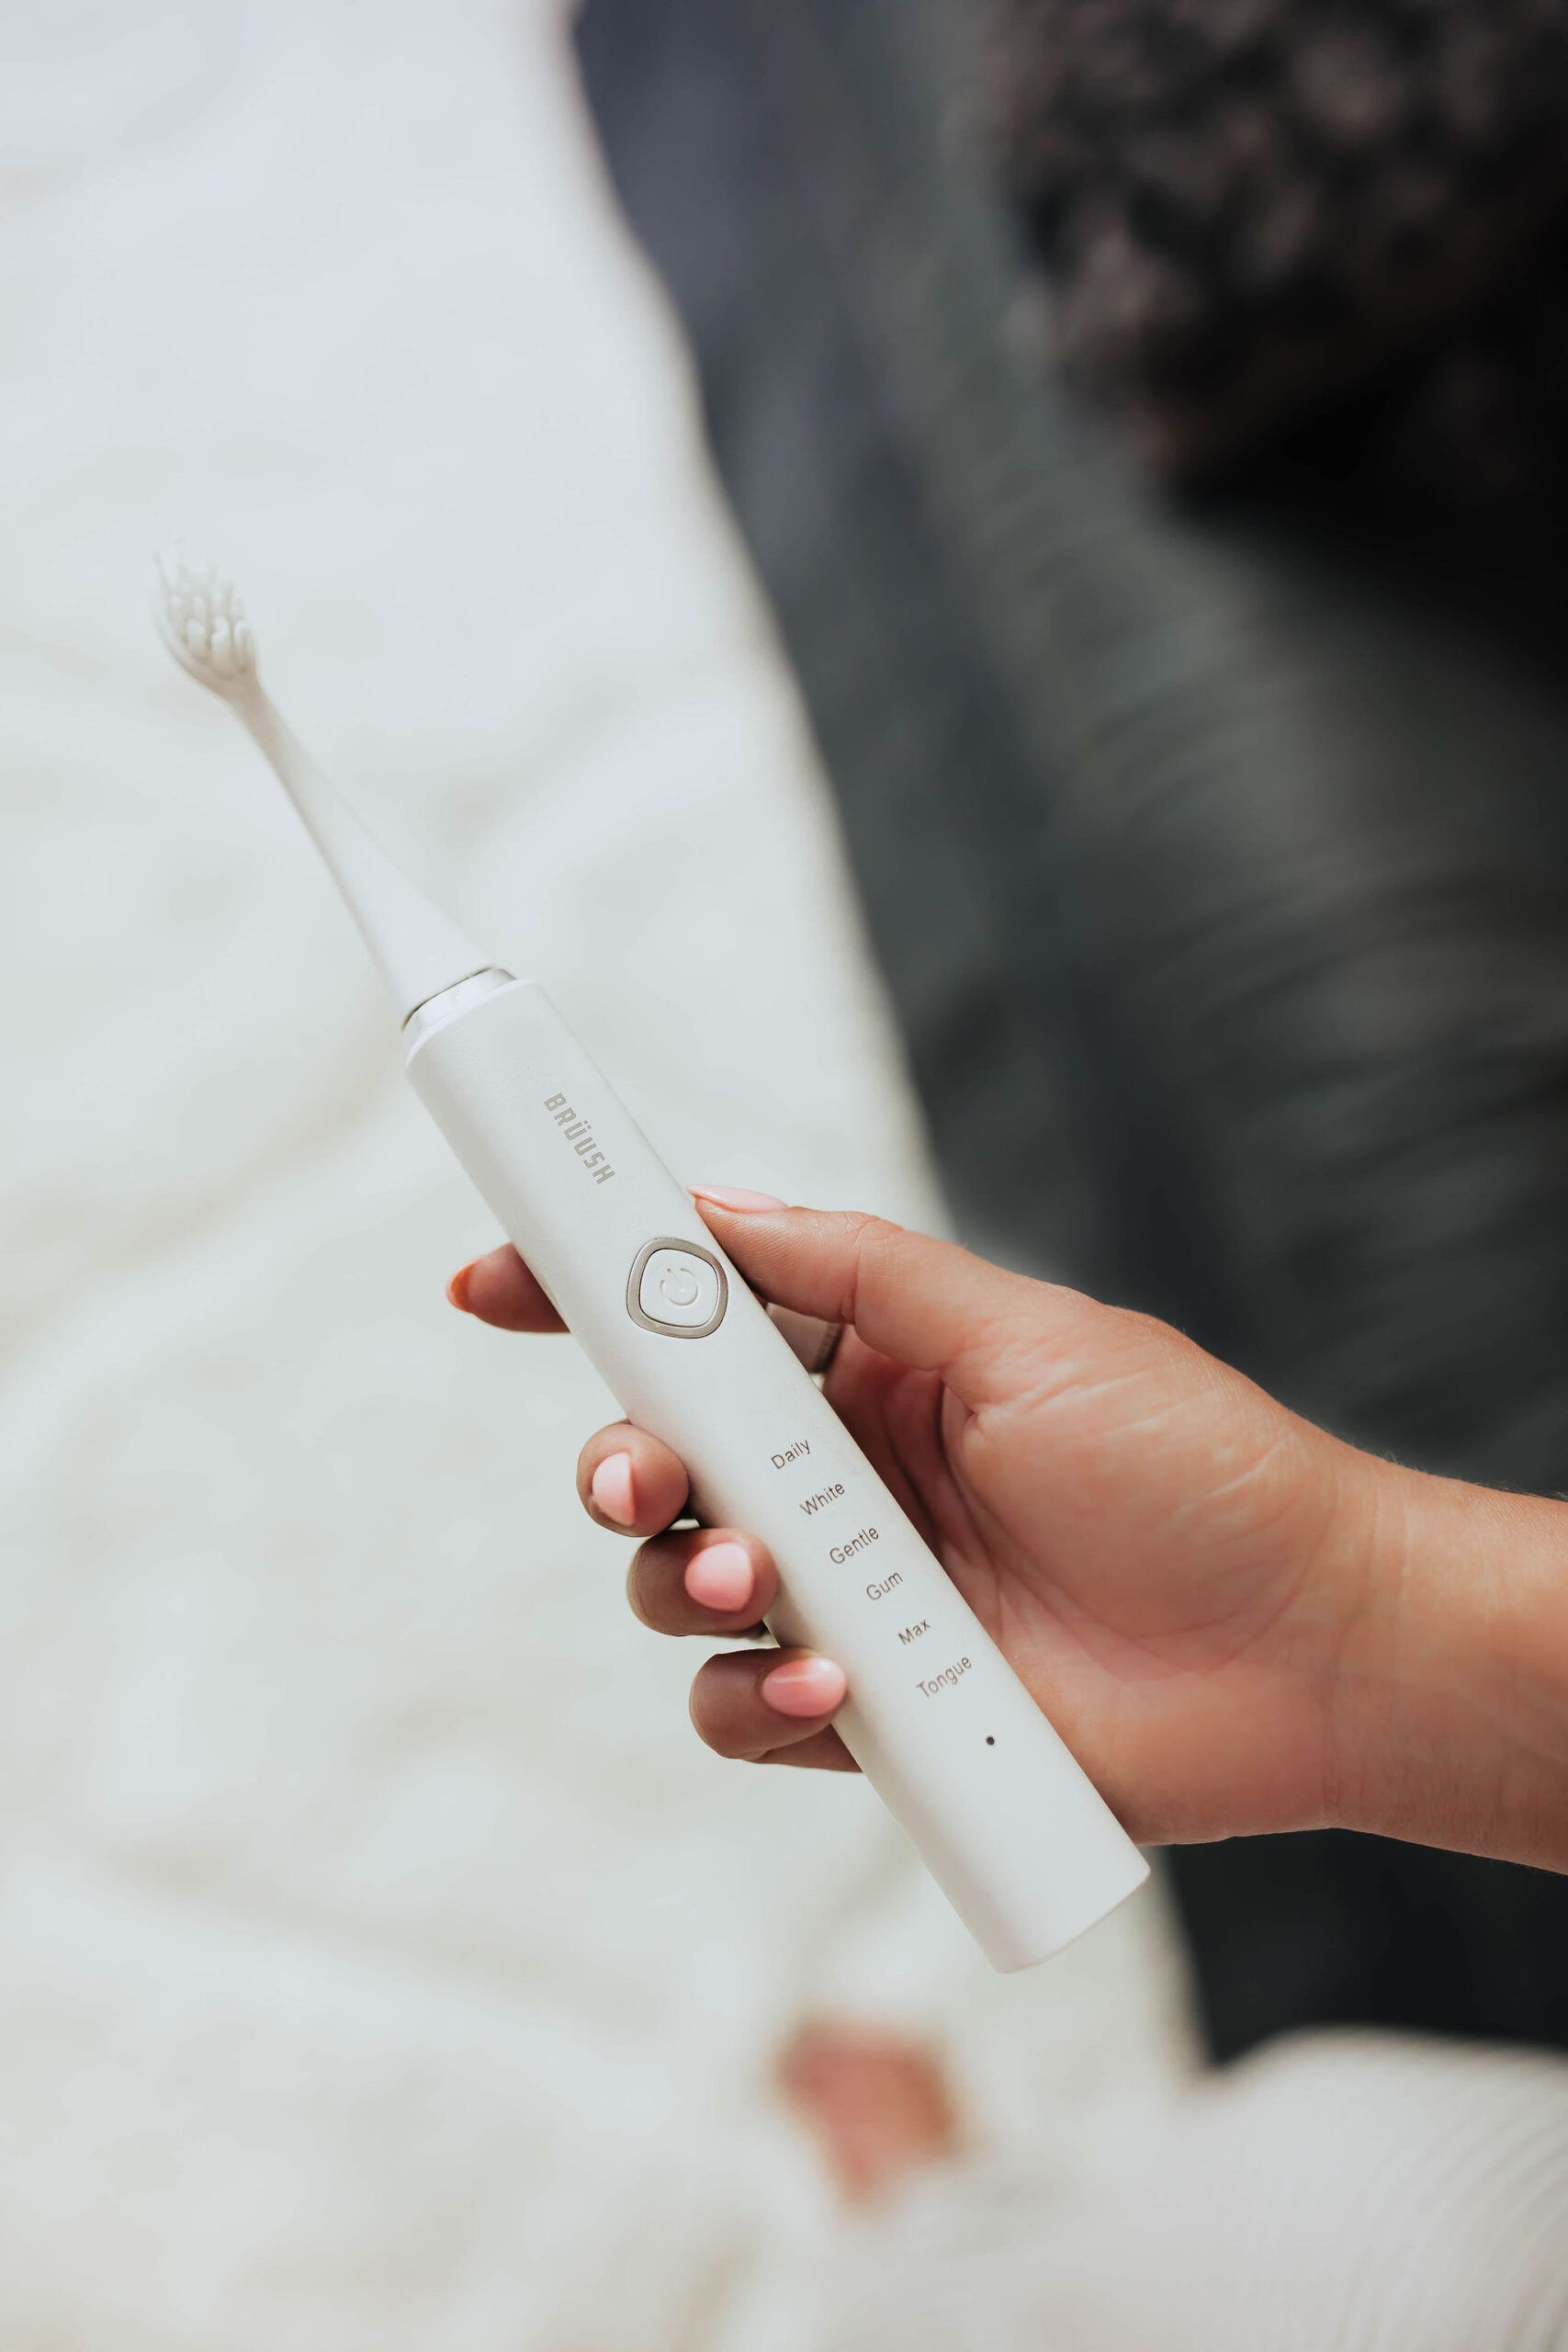 Brüush Review, San Francisco fashion and lifestyle blogger KatWalkSF shares an honest review of the Brüush electronic toothbrush 